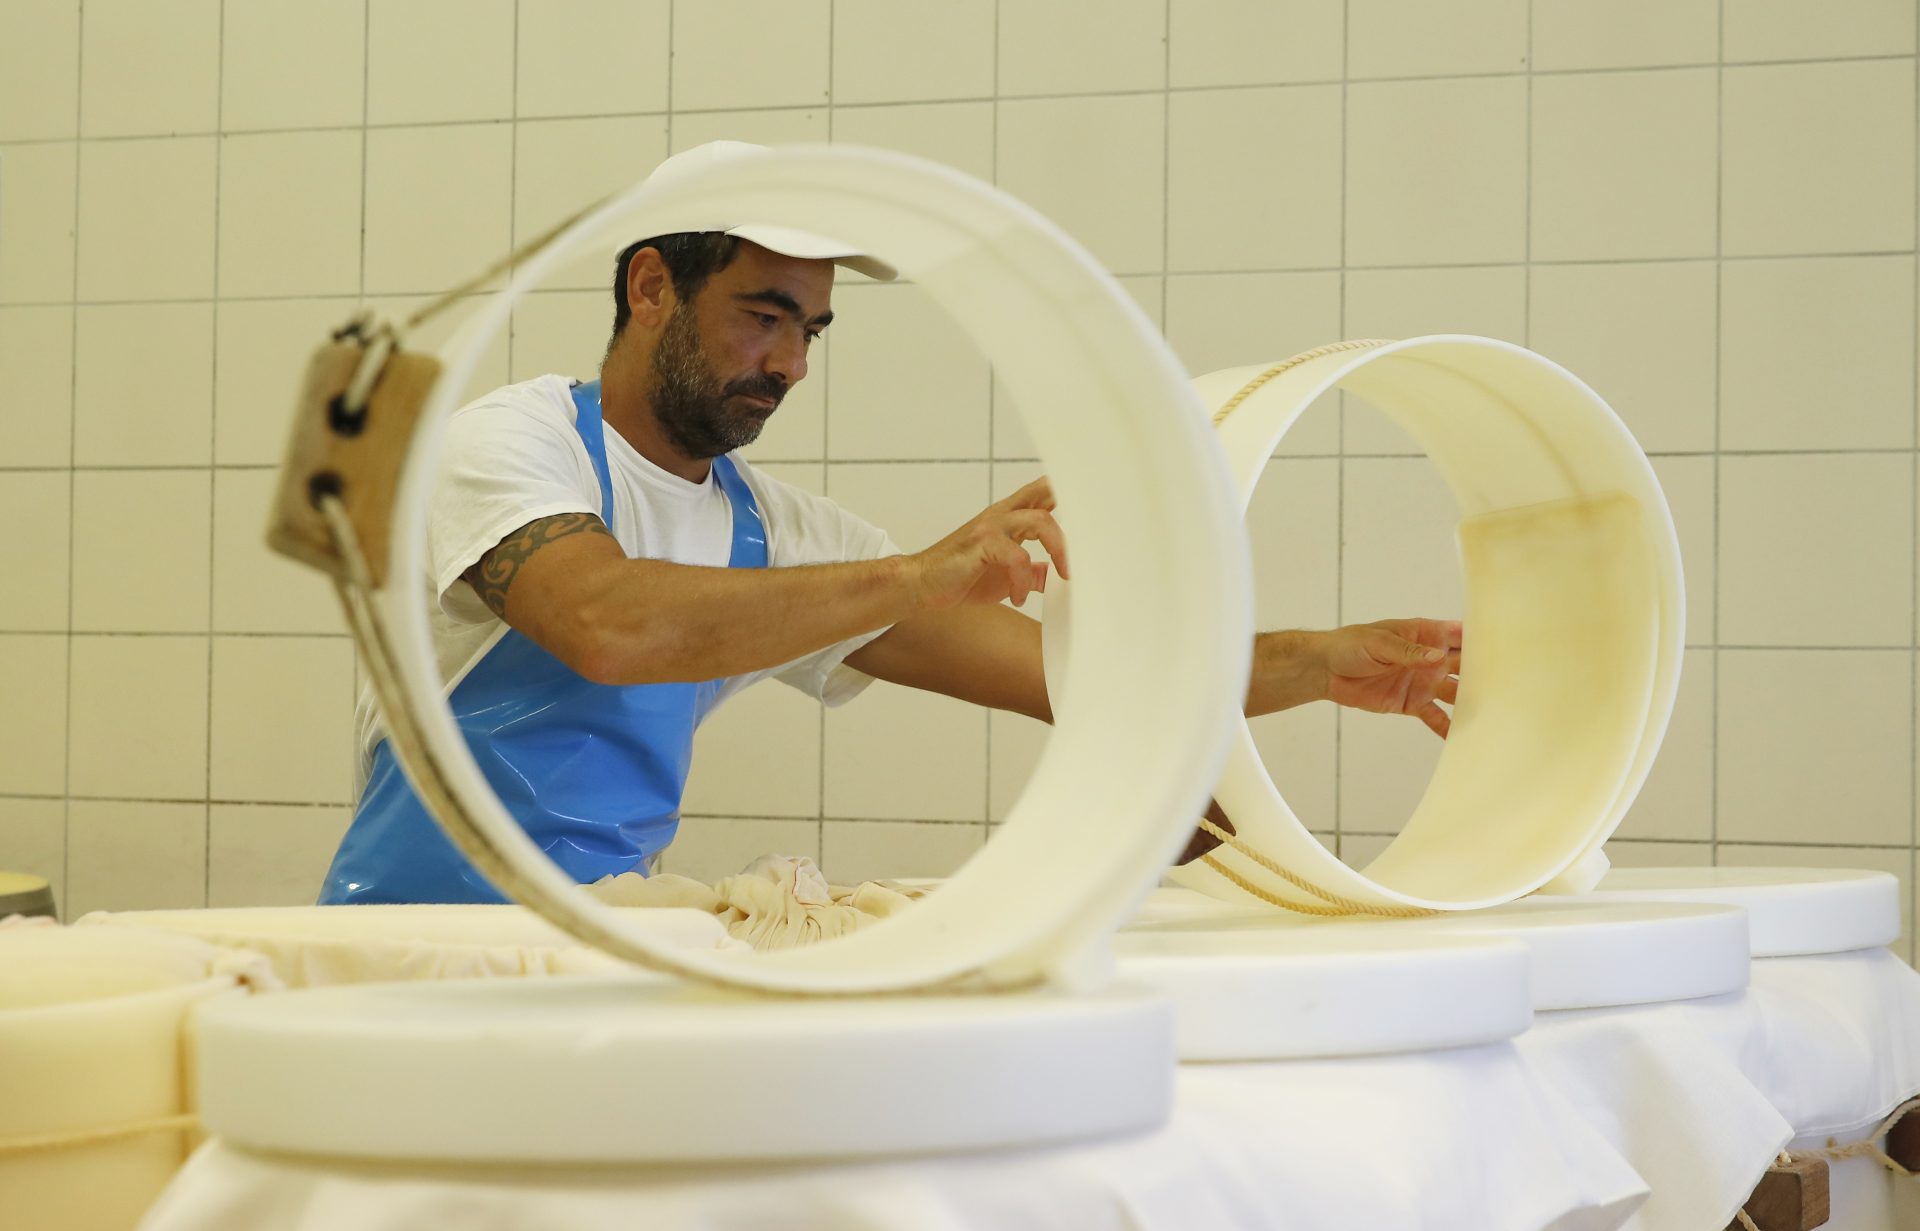 In this photo taken Tuesday, Oct. 8, 2019, Parmigiano Reggiano Parmesan cheese wheels are created in Noceto, near Parma, Italy. U.S. consumers are snapping up Italian Parmesan cheese ahead of an increase in tariffs to take effect next week. The agricultural lobby Coldiretti on Friday, Oct. 11, 2019, said sales of both Parmigiano Reggiano and Grana Padano, aged cheeses defined by their territory of origin, have skyrocketed by 220% since the higher tariffs were announced one week ago.